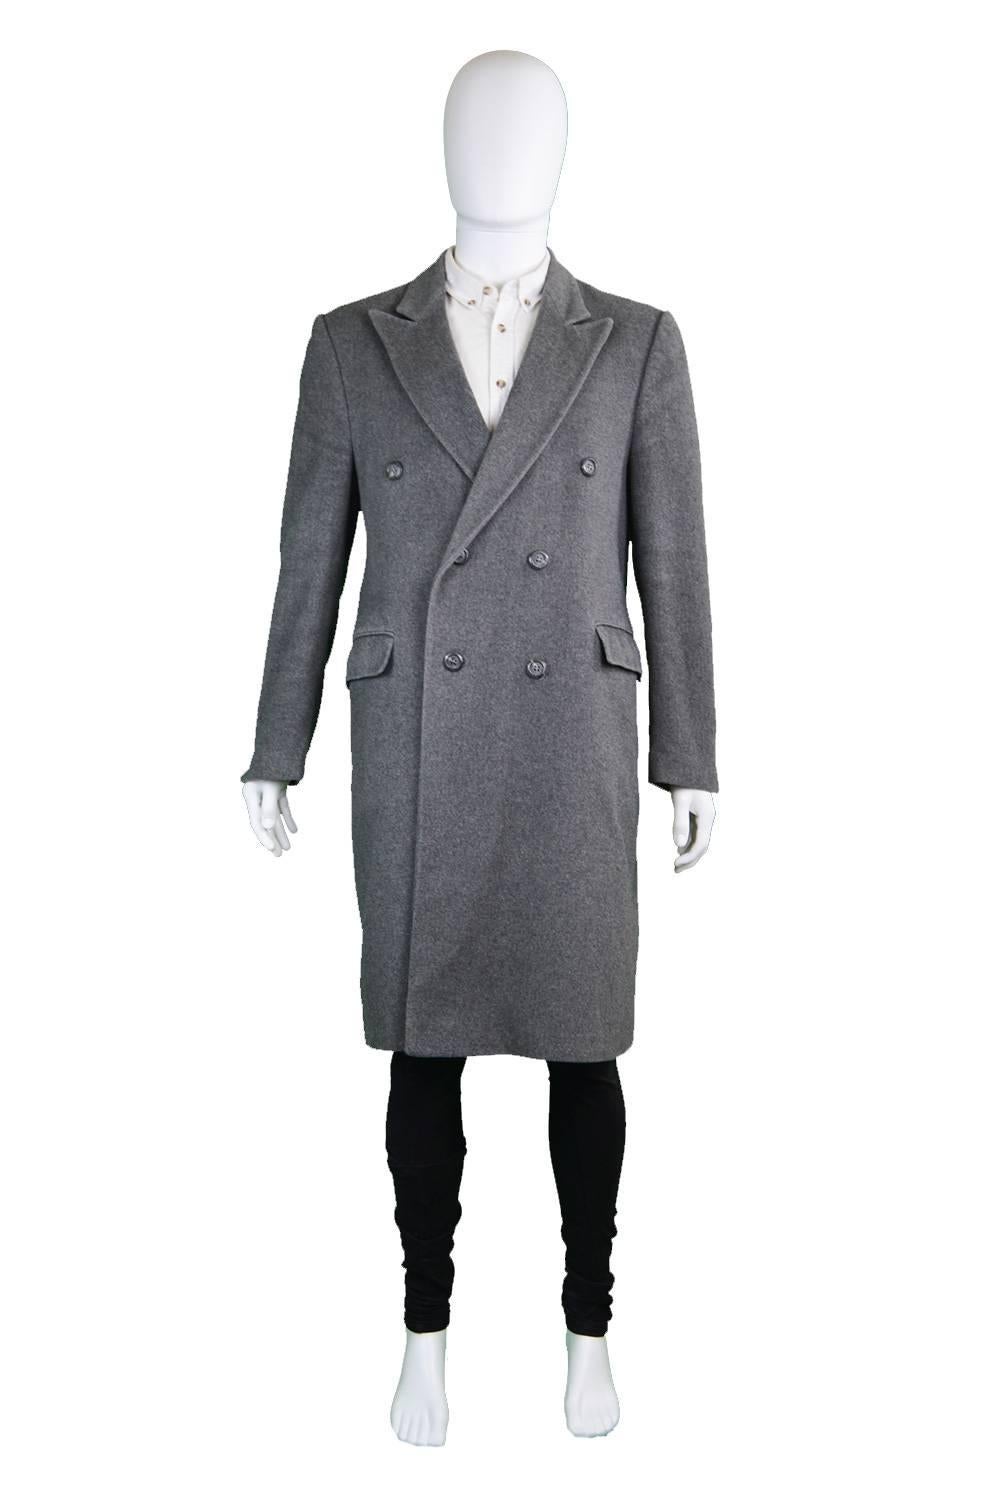 An incredible vintage men's overcoat from the late 1960s by highly collectible Carnaby Street label, Take 6. With peaked lapels, a double breasted fastening this mod coat is the perfect addition to any serious Carnaby Street collector's collection -